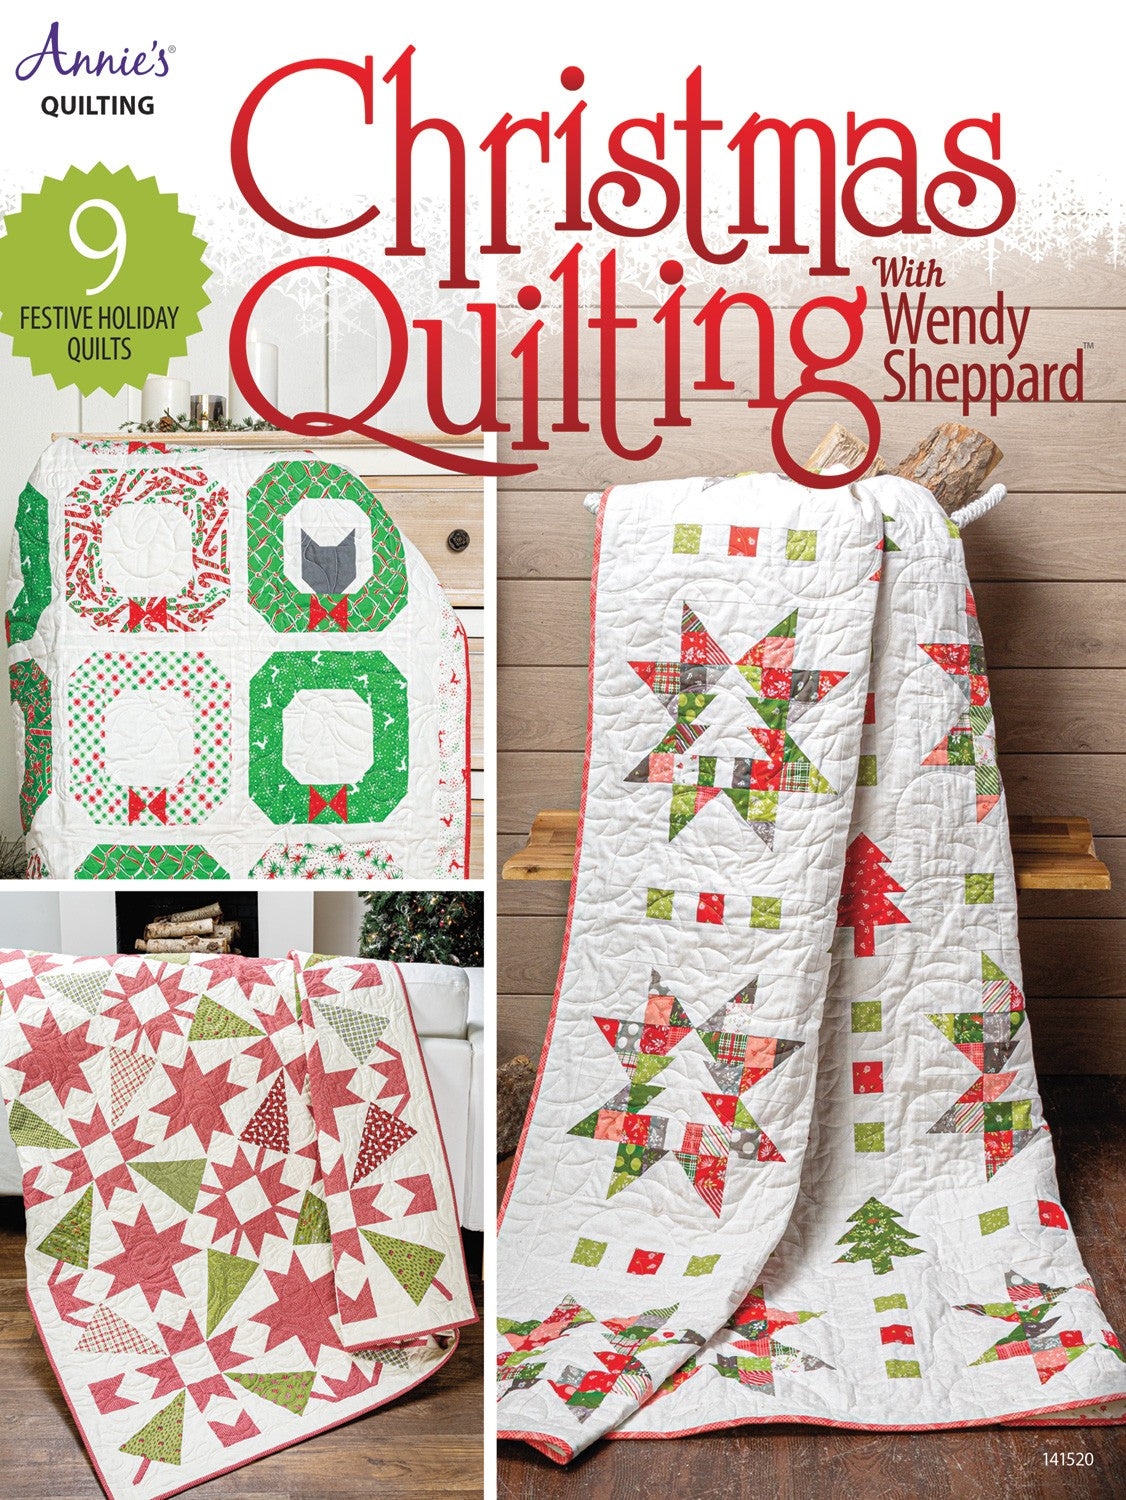 Annie's Christmas Quilting with Wendy Sheppard